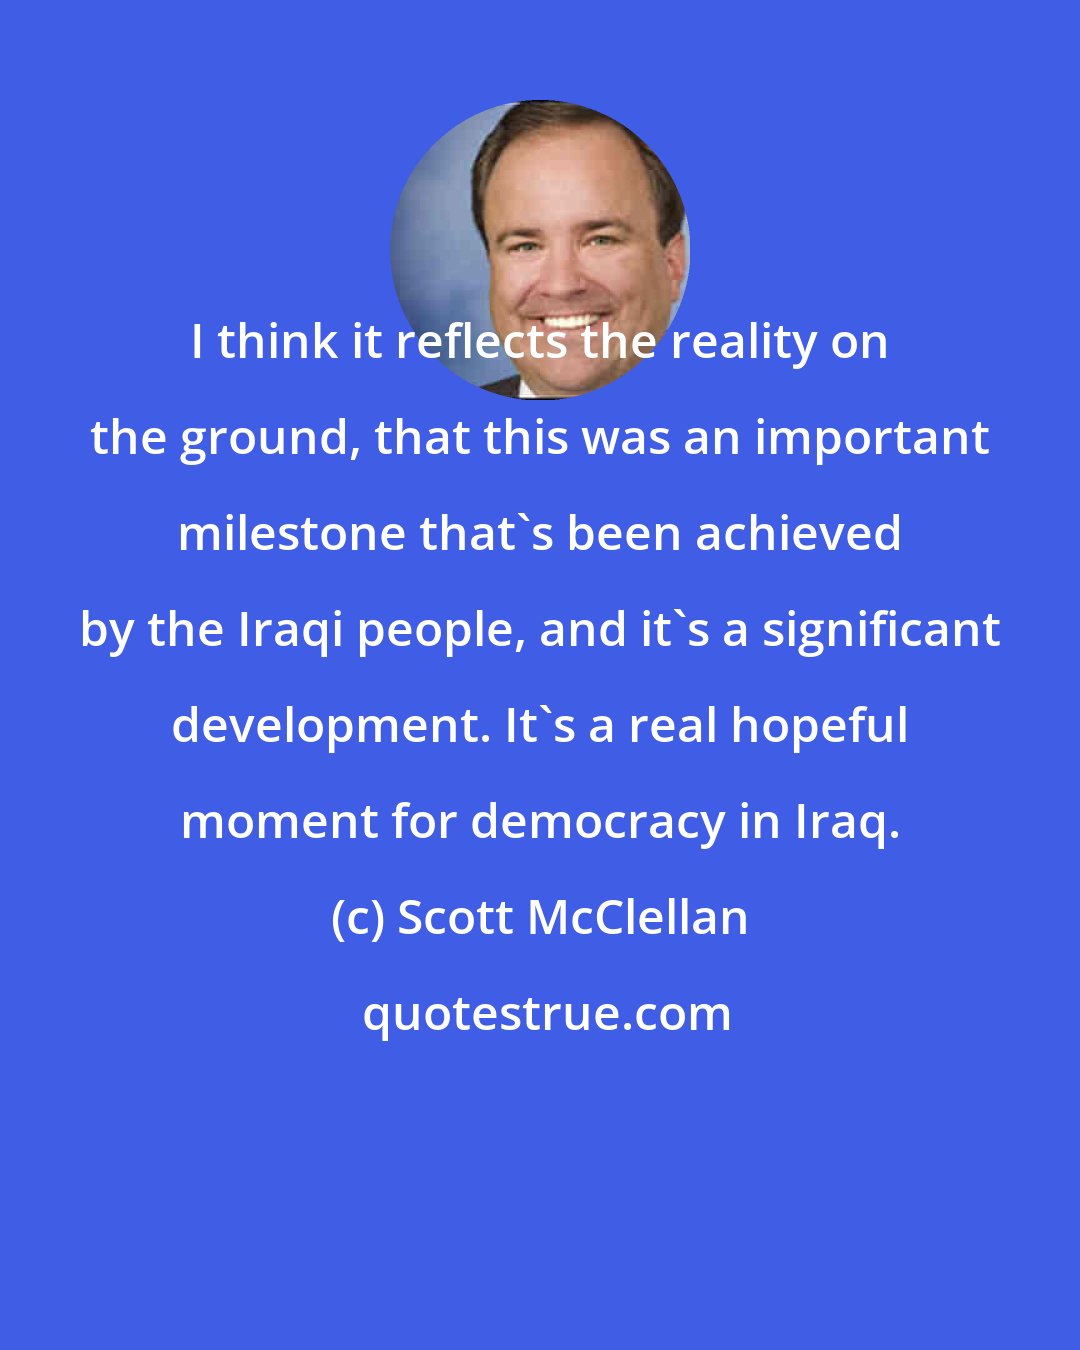 Scott McClellan: I think it reflects the reality on the ground, that this was an important milestone that's been achieved by the Iraqi people, and it's a significant development. It's a real hopeful moment for democracy in Iraq.